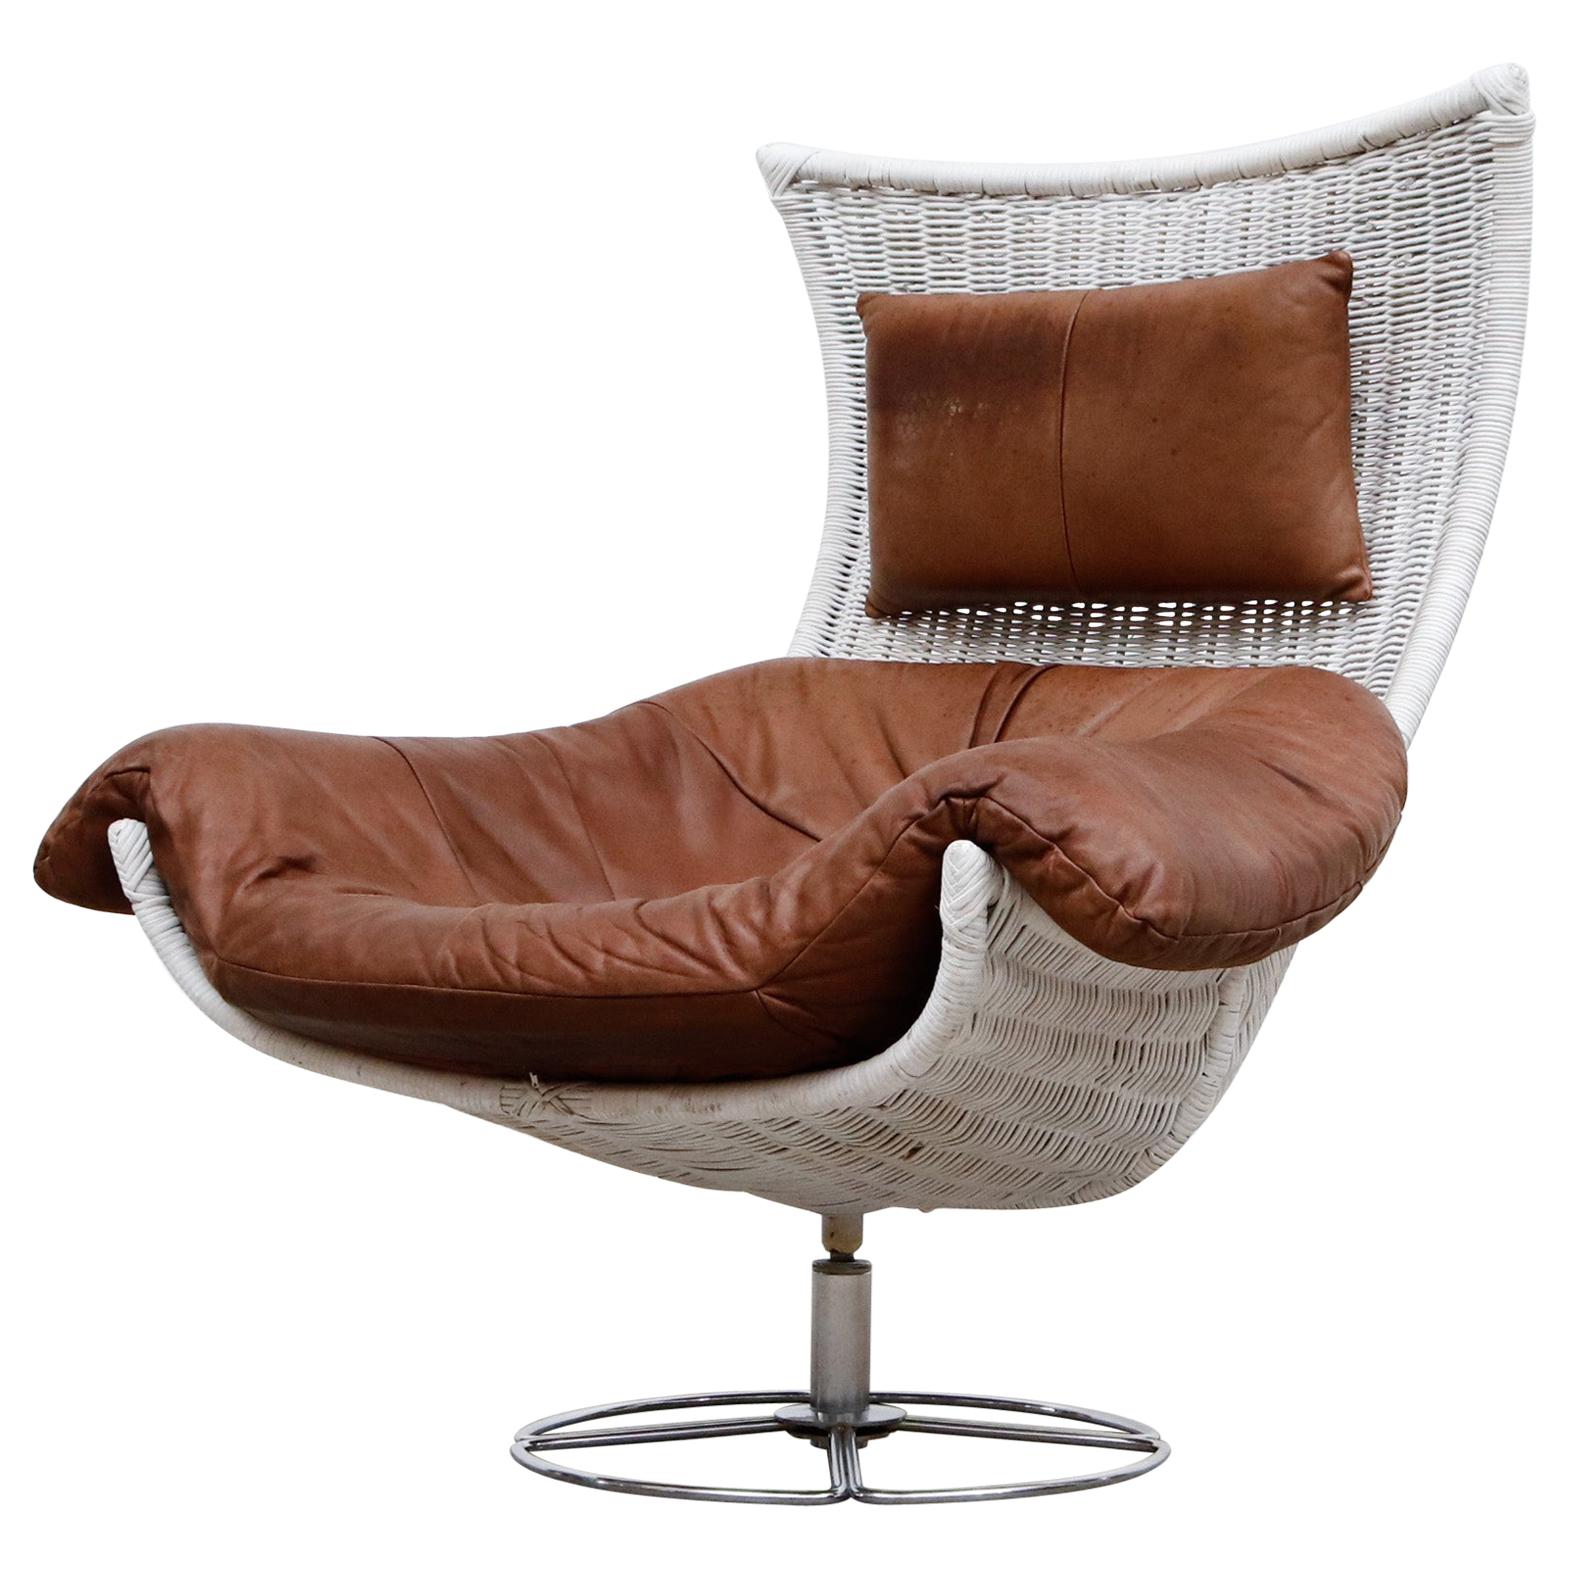 Alabama Gluren Aan boord Gerard van den Berg White Rattan and Leather Lounge Chair For Sale at  1stDibs | gerard van den berg lounge chair